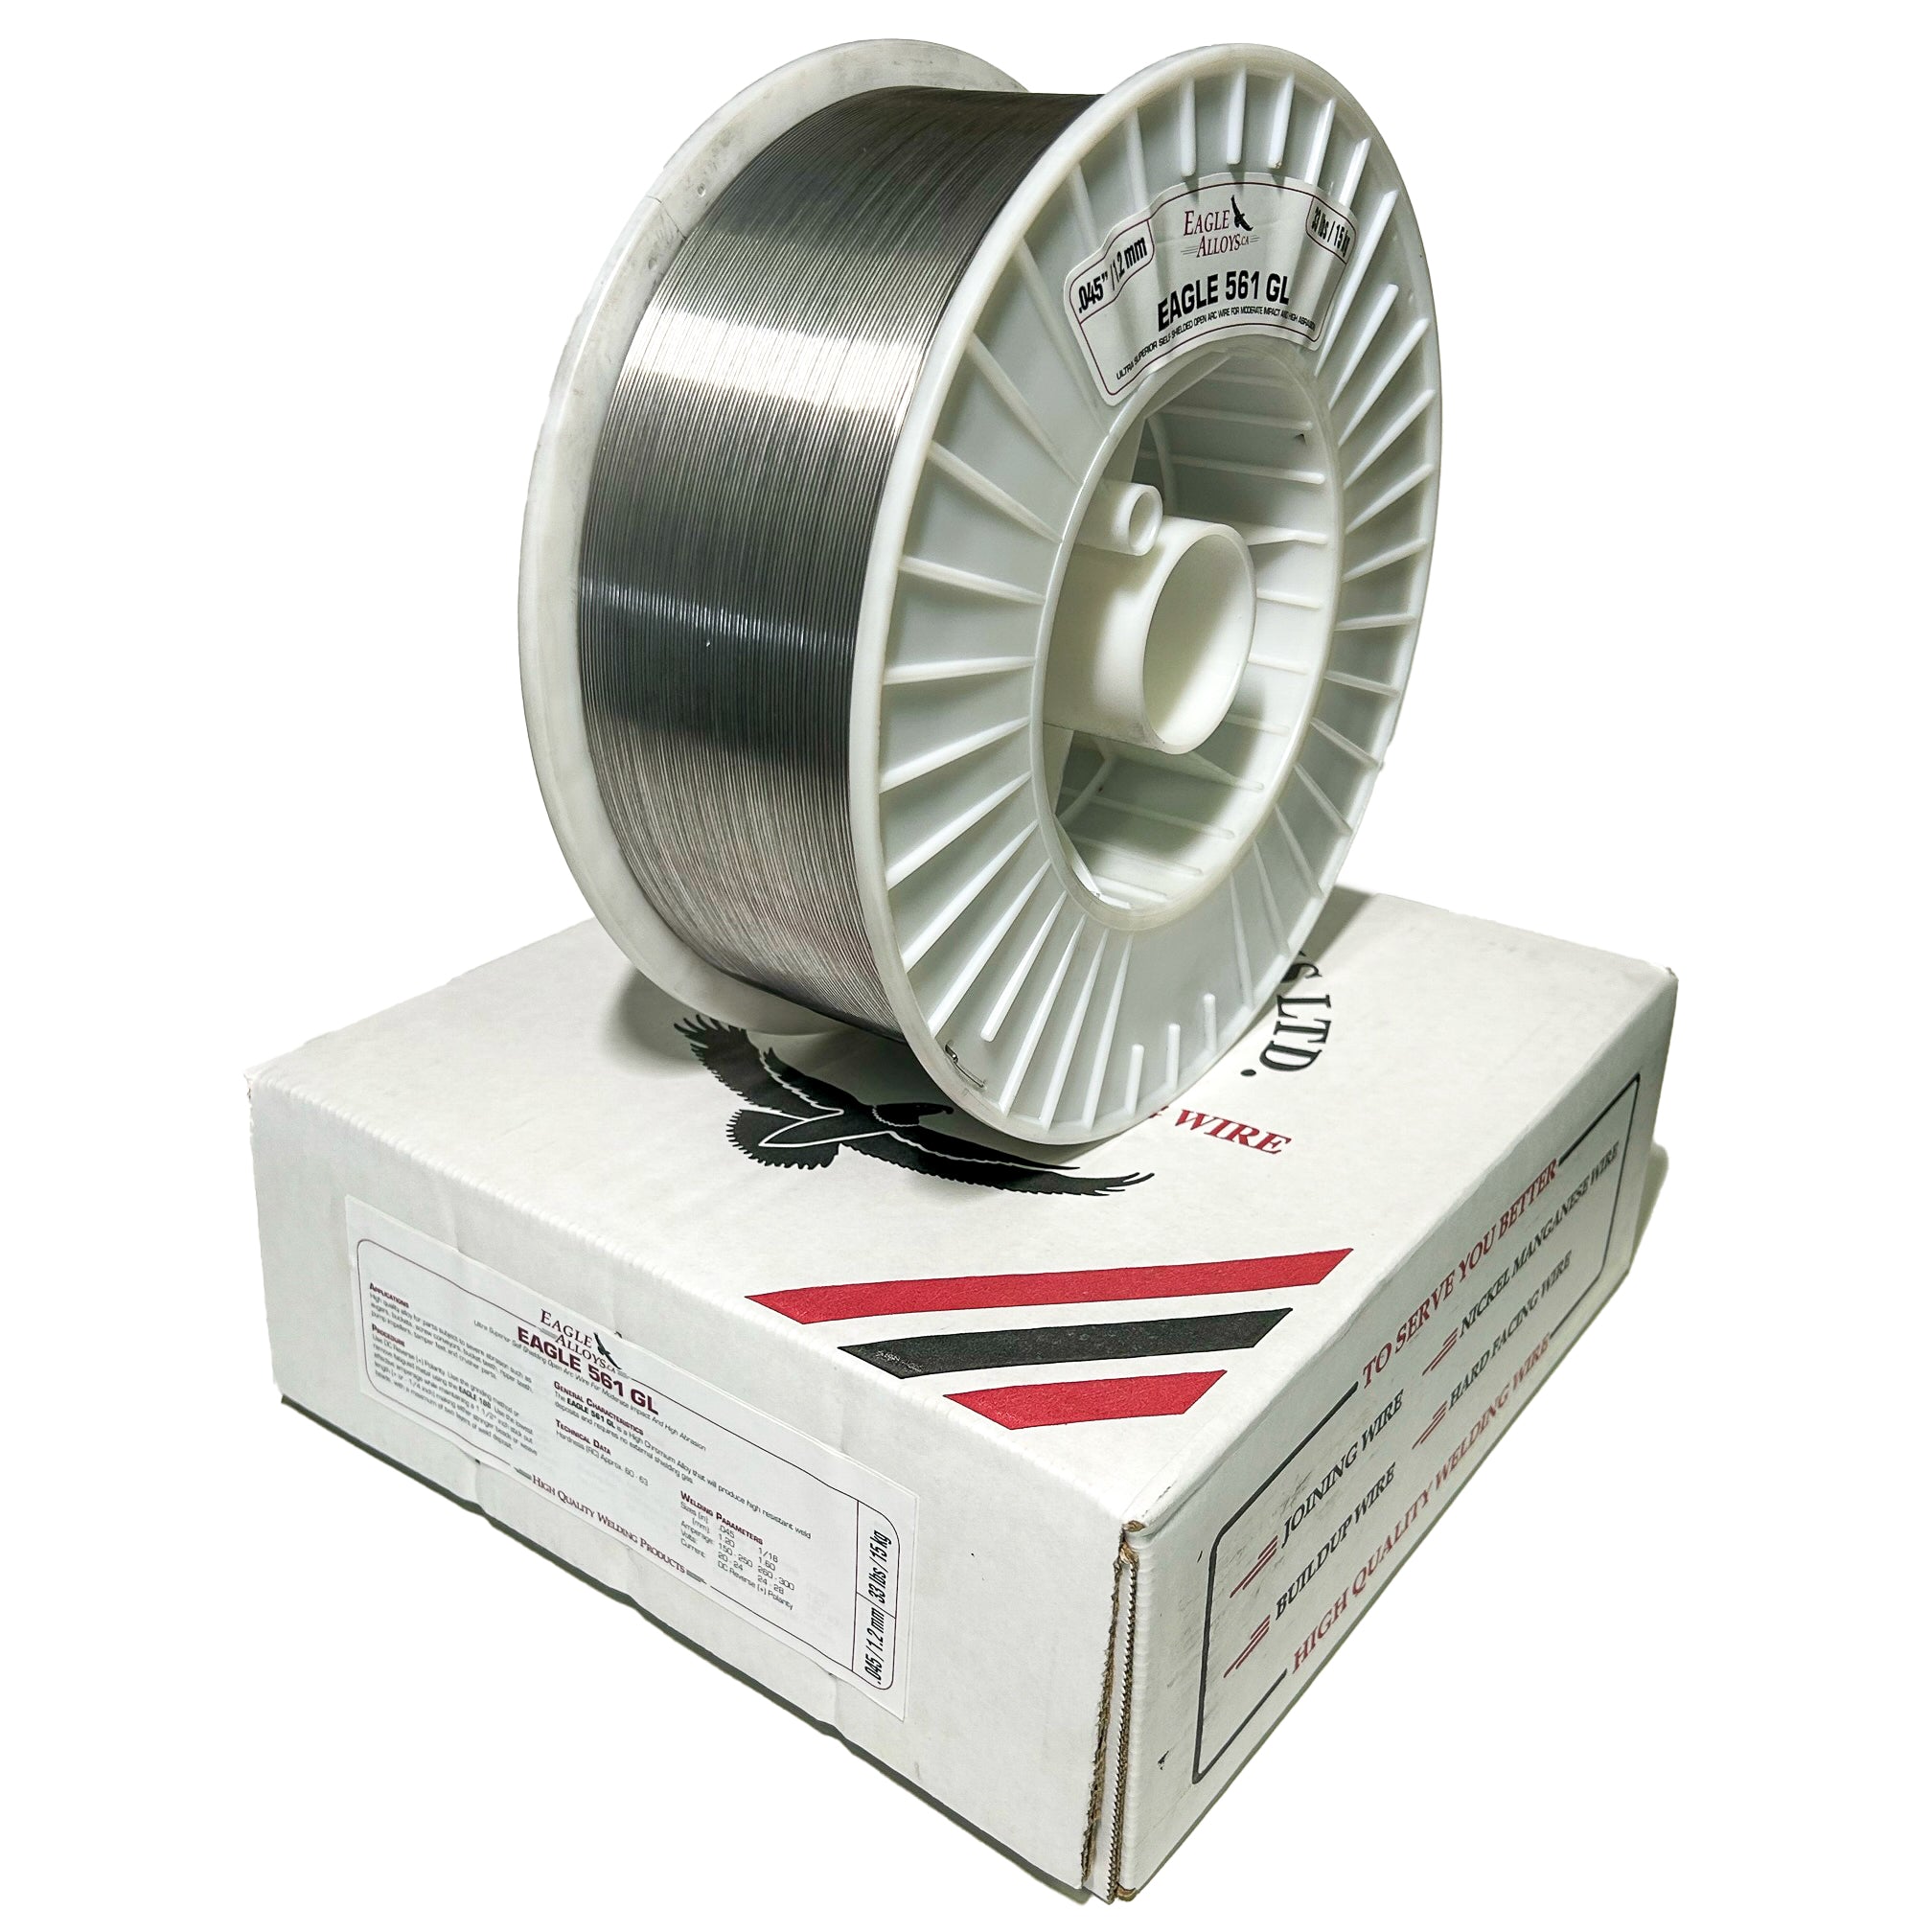 EAGLE 561 GL | Ultra superior self shielded open arc wire for moderate impact and high abrasion.